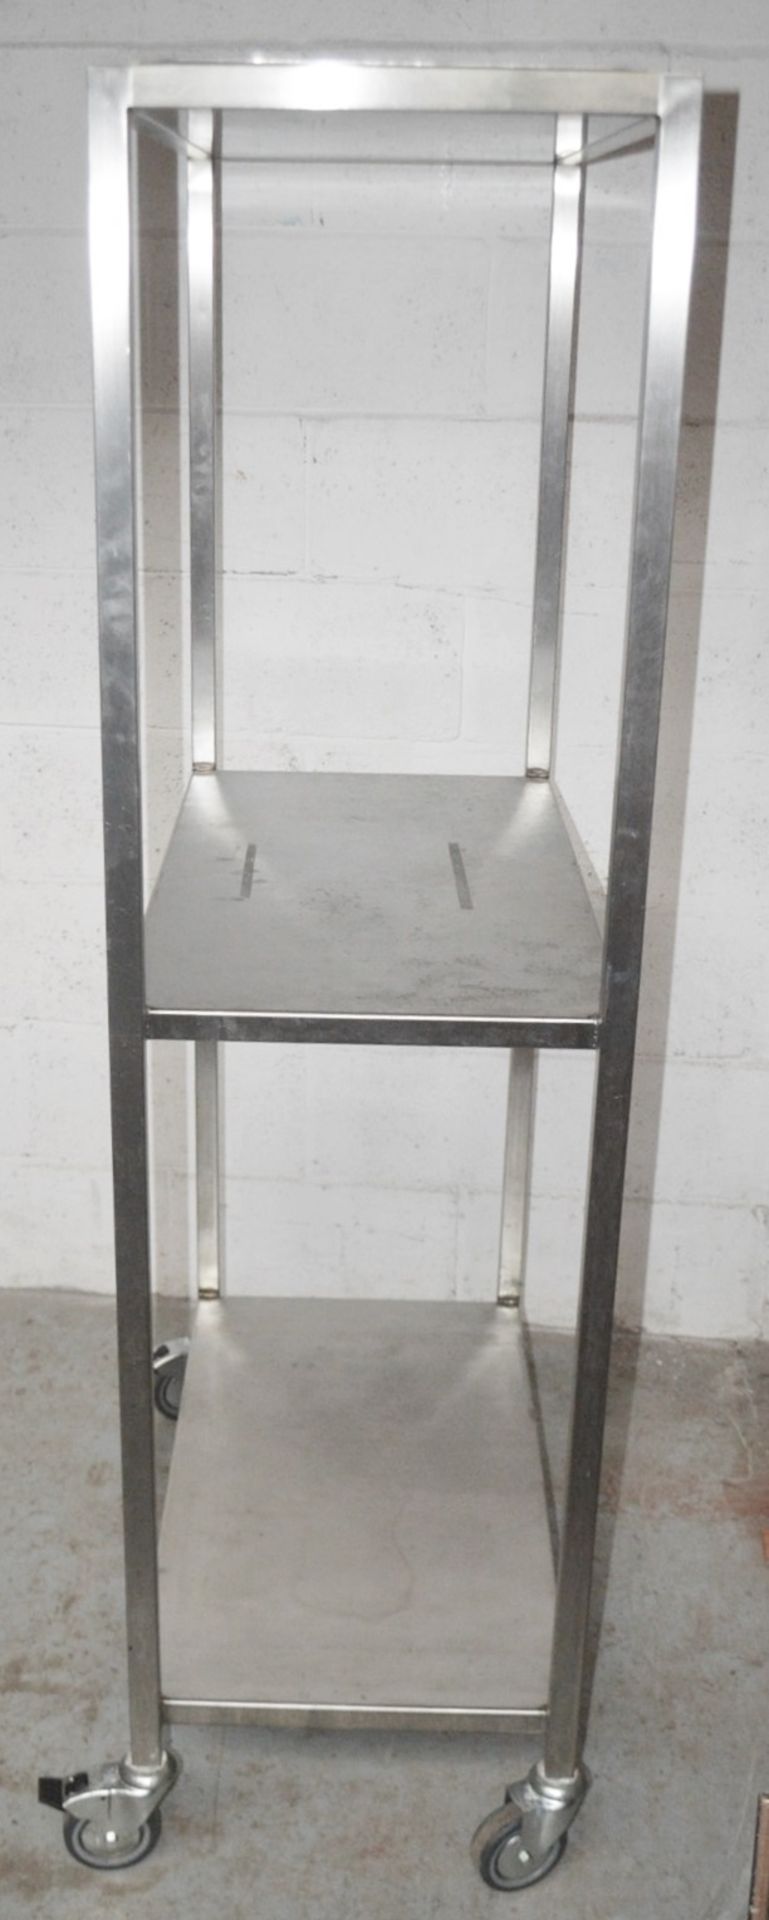 1 x Stainless Steel Commercial Kitchen 3-Tier Shelving Unit On Castors - Dimensions: H170 x W90 x - Image 3 of 3